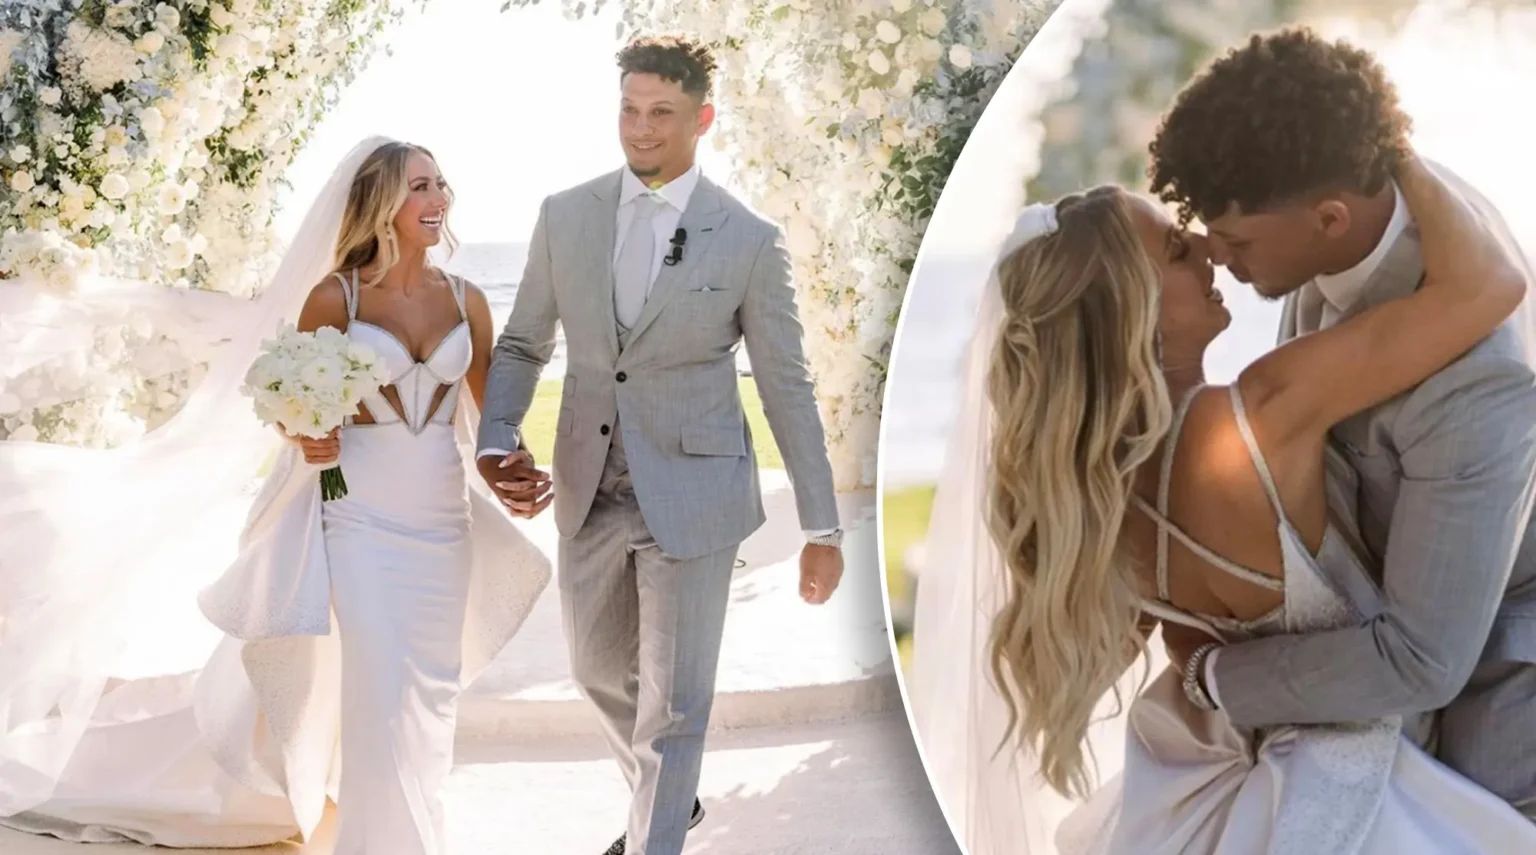 Brittany and Patrick Mahomes Celebrate Wedding Anniversary: Mahomes appreciates having his loving wife by his side as he journey on life “Nothing Beats Doing Life with You”